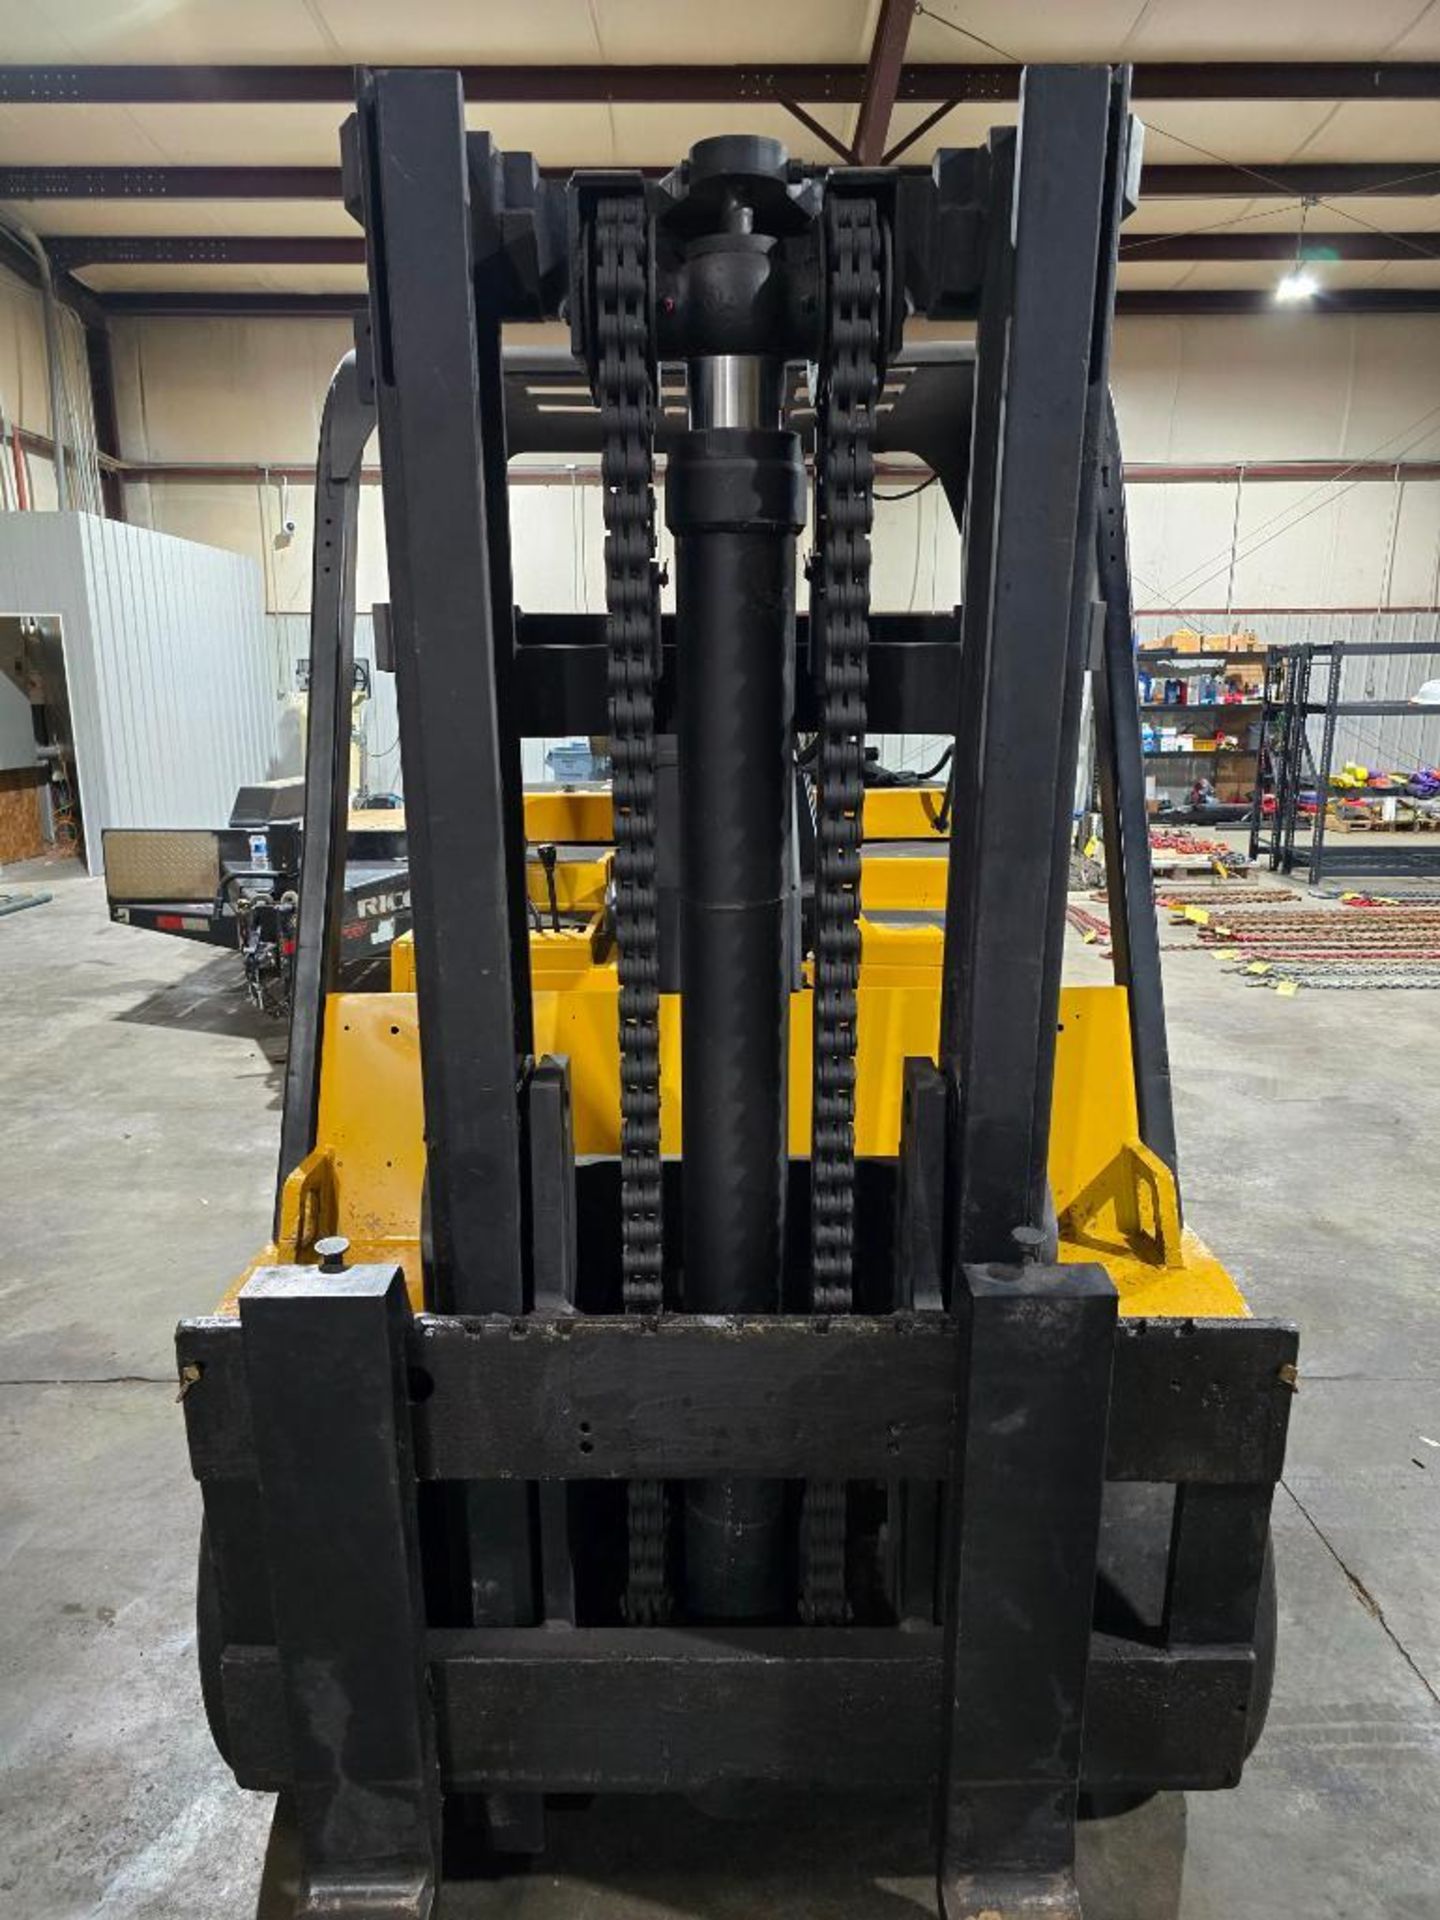 Caterpillar 12,500-LB. Capacity Forklift, Model T125D, LPG, Cushion Tires, 1,221 Hours, 2-Stage Mast - Image 4 of 12